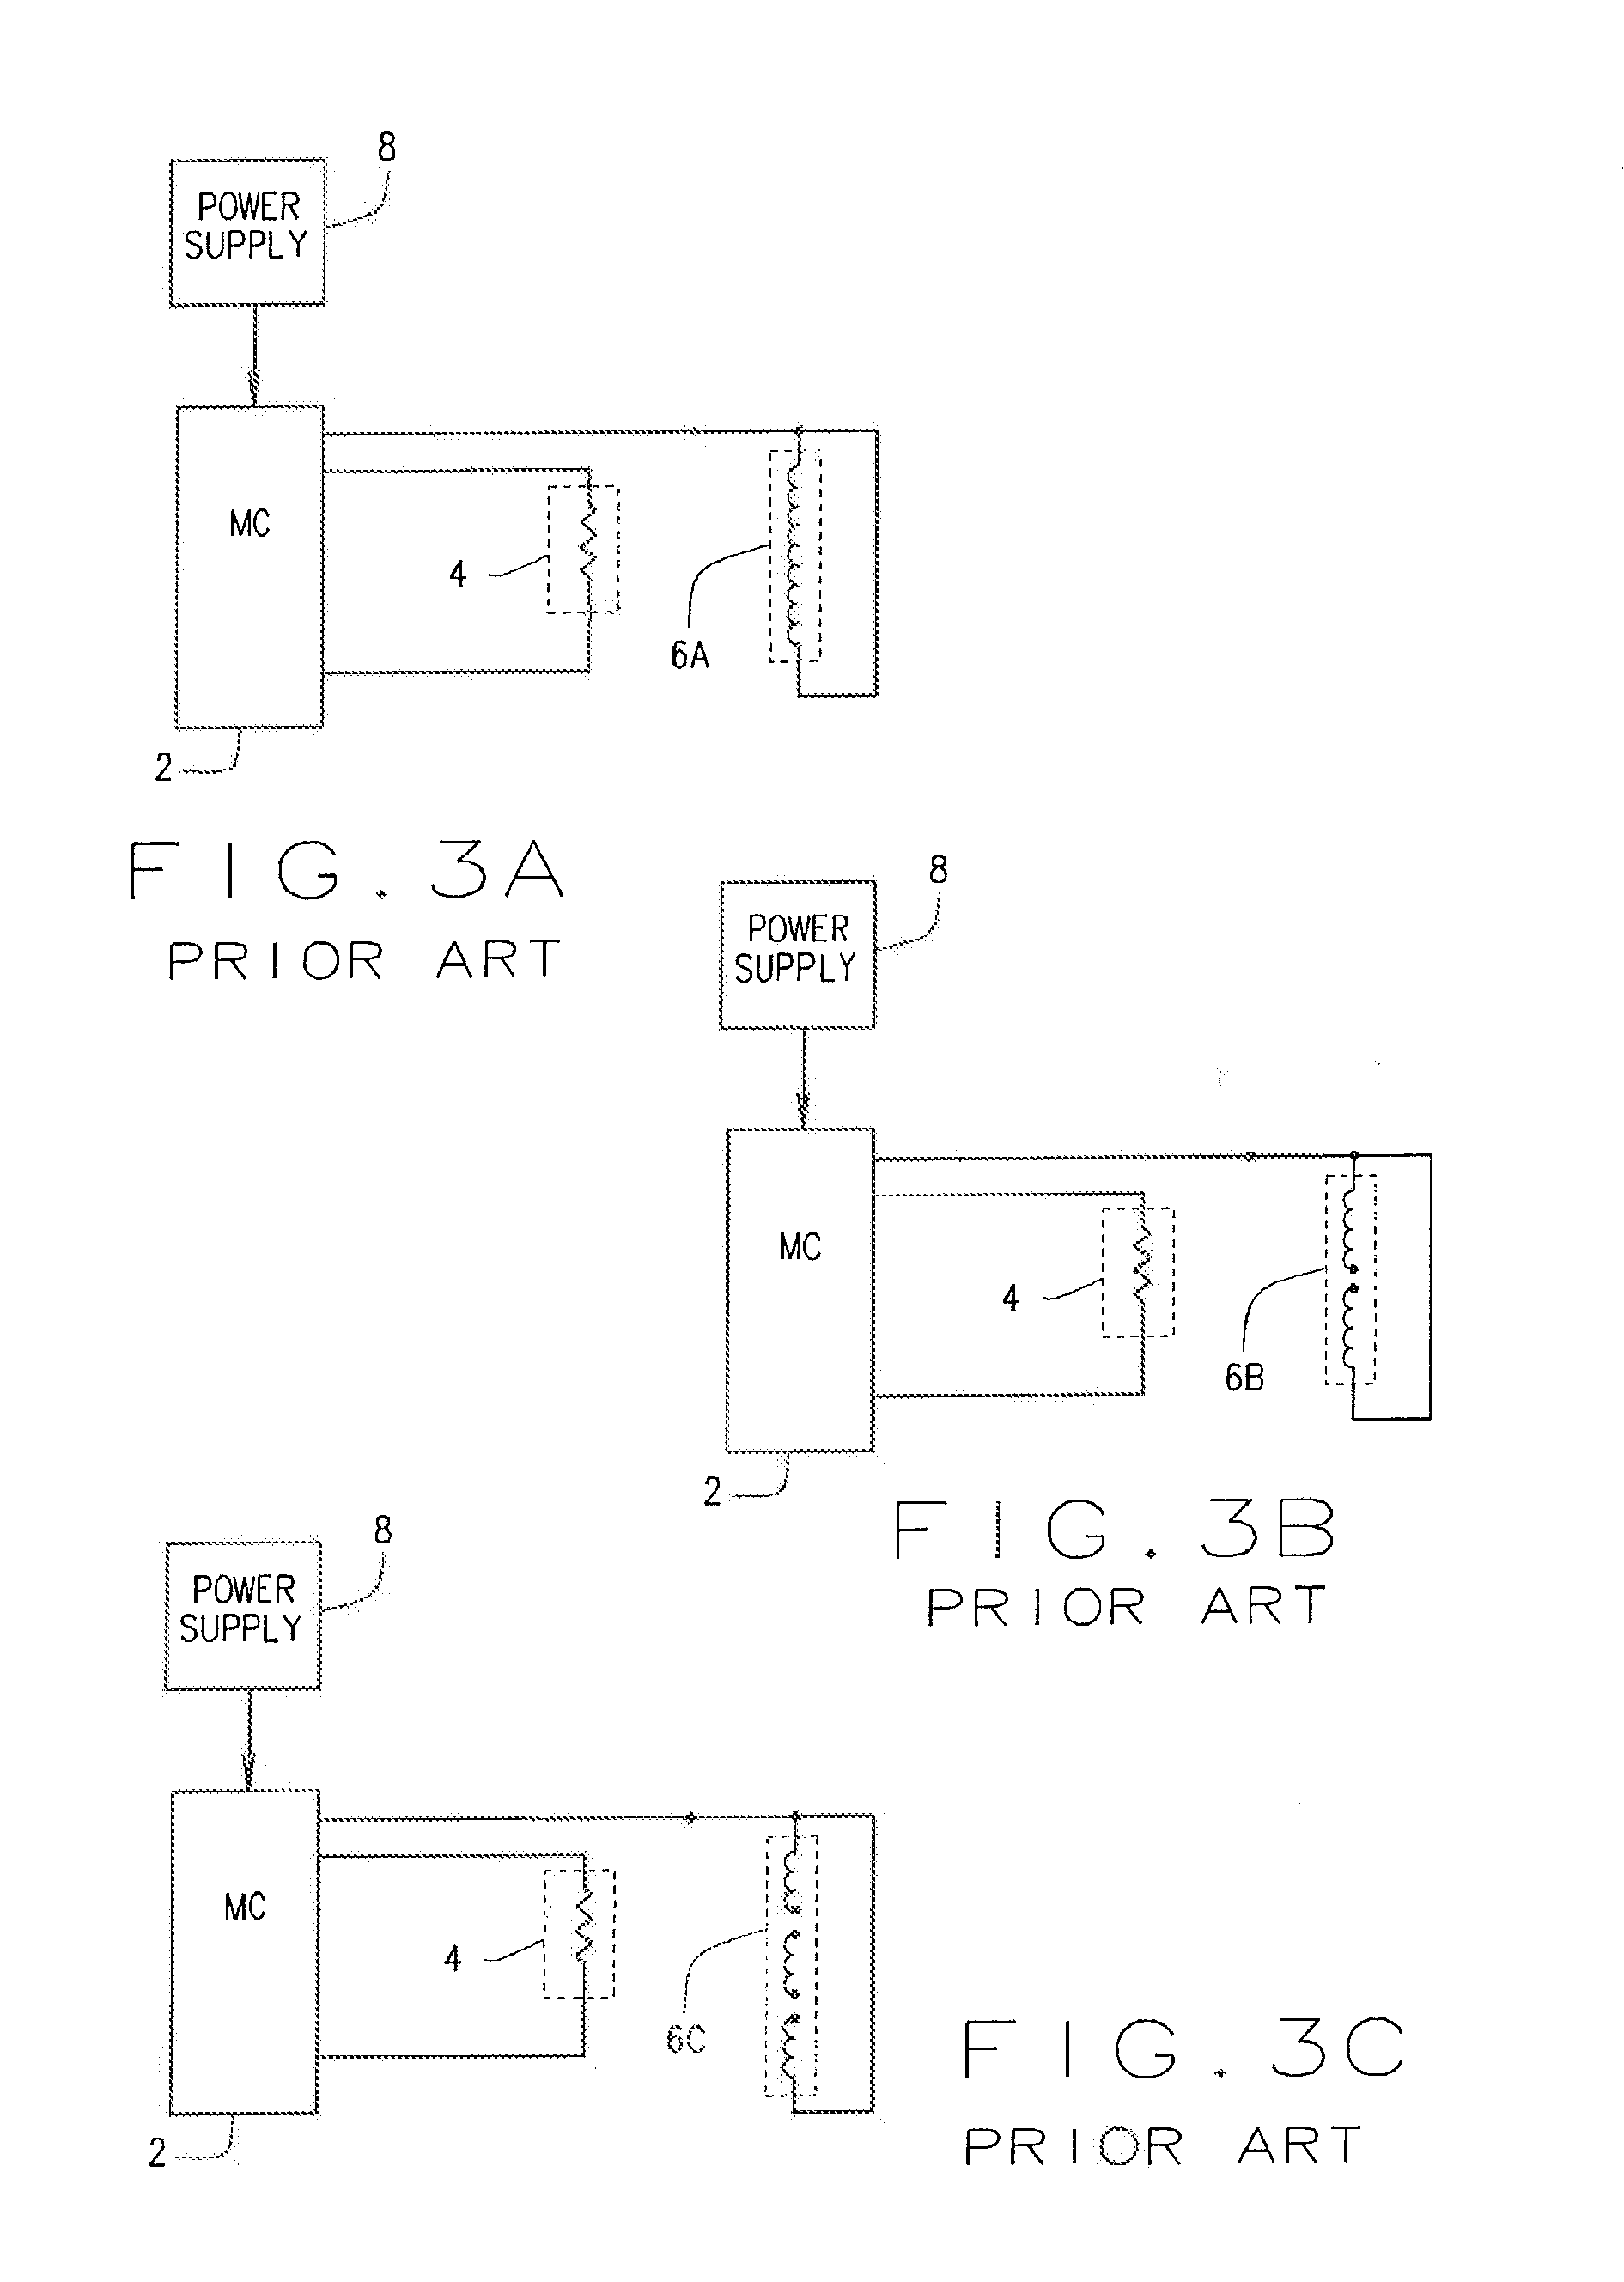 Circuit Integrity Detection System for Detecting The Integrity of A Sensing Wire in Electrically Heated Textiles